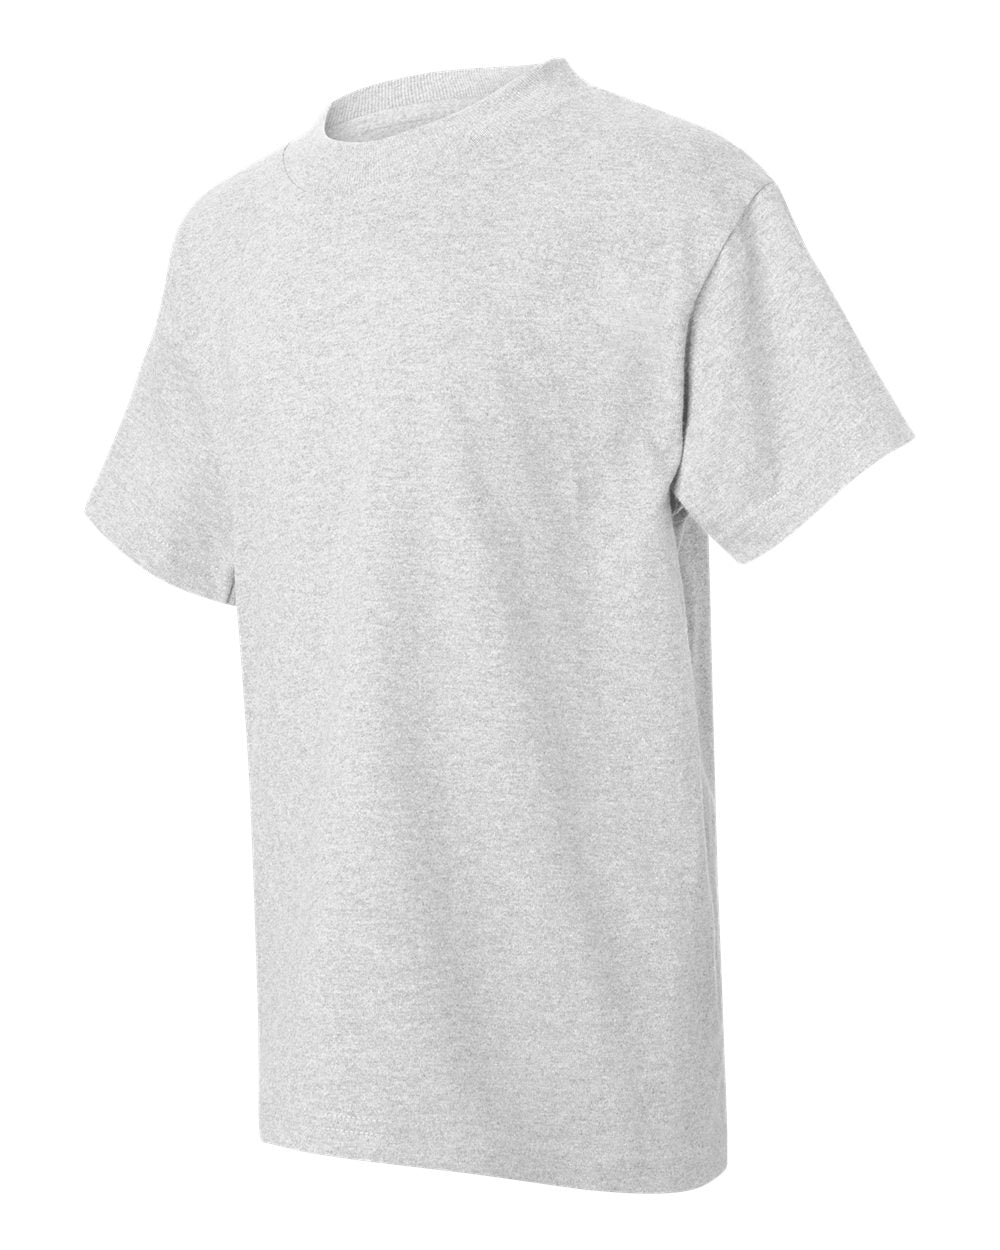 HEAVYWEIGHT Hanes - Authentic Youth T-Shirt - 5450